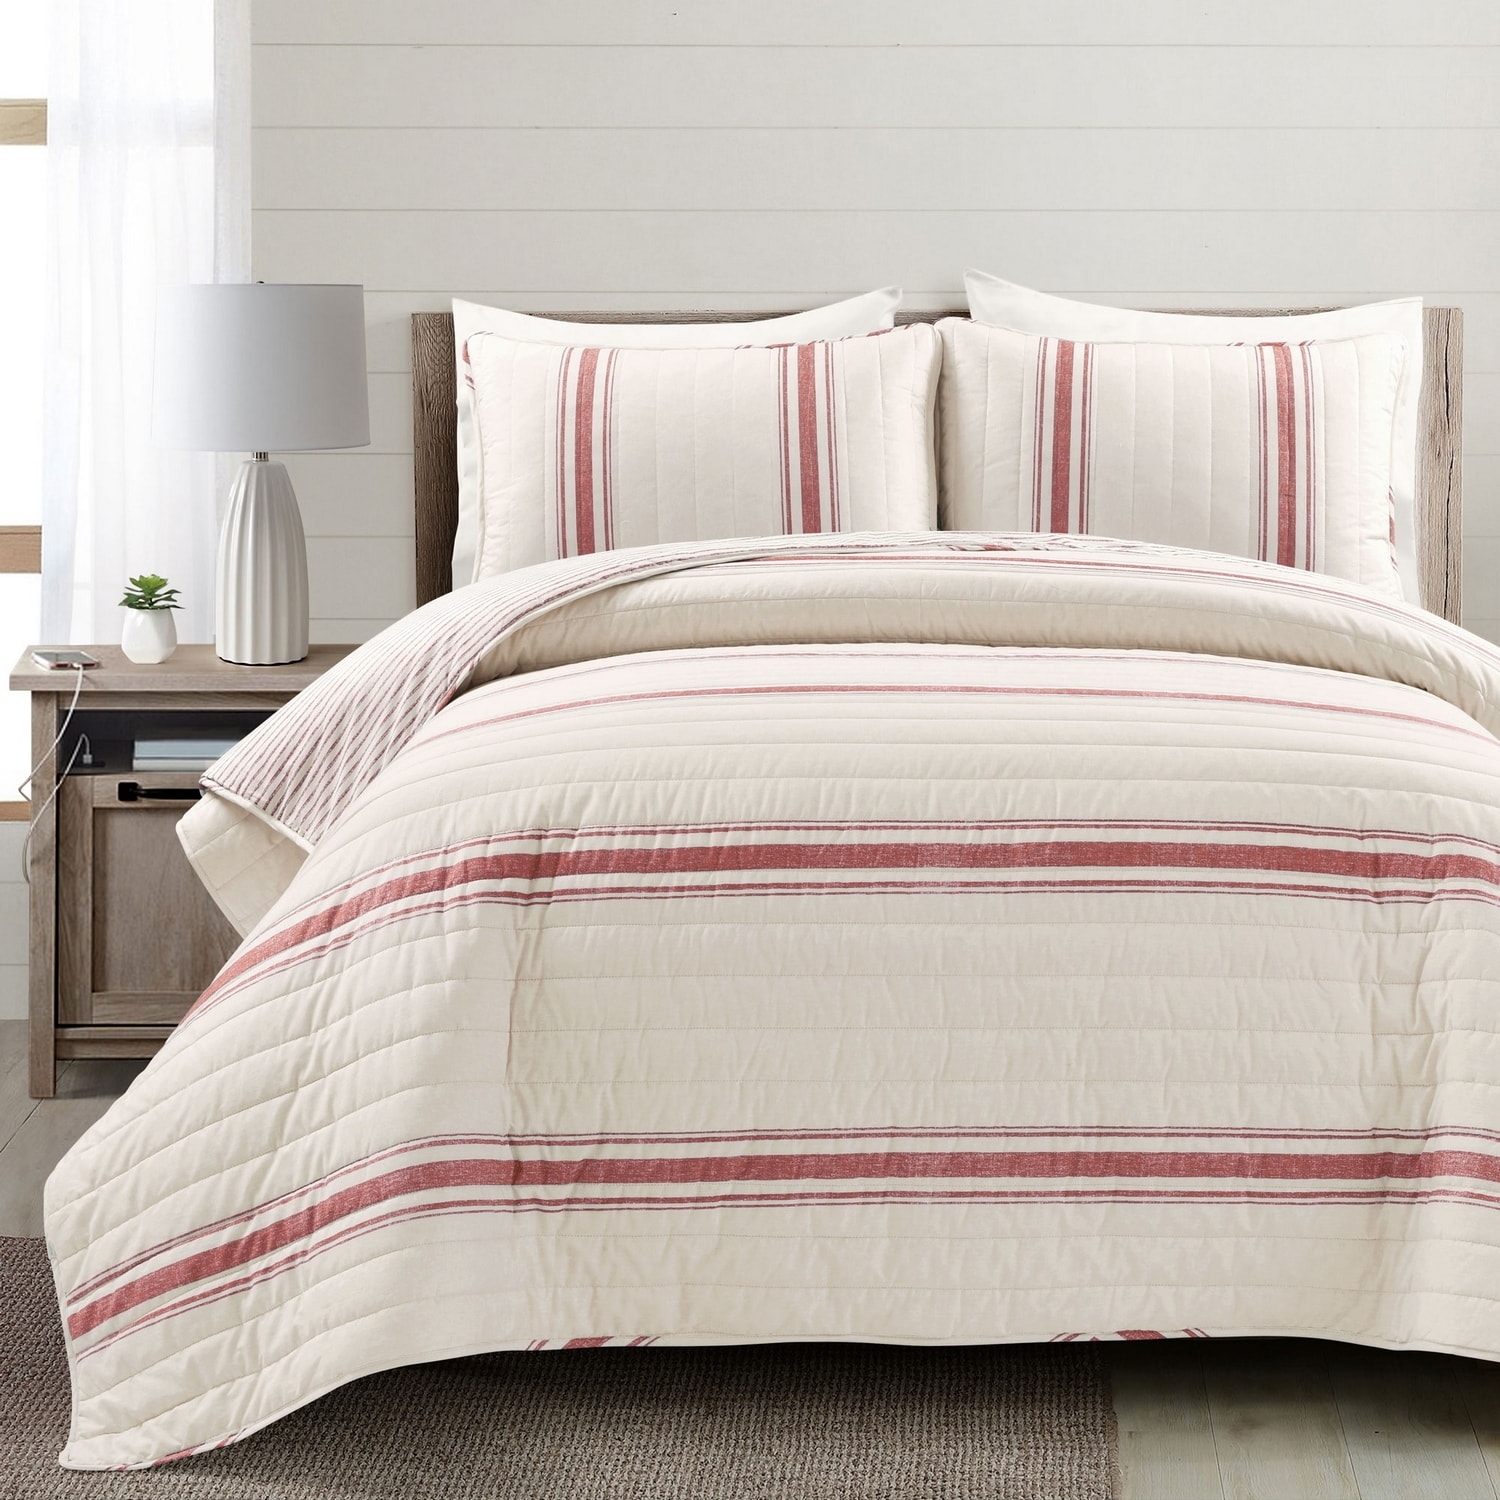 Lush Decor Red Stripe Reversible King Quilt Cotton with (Fill) in